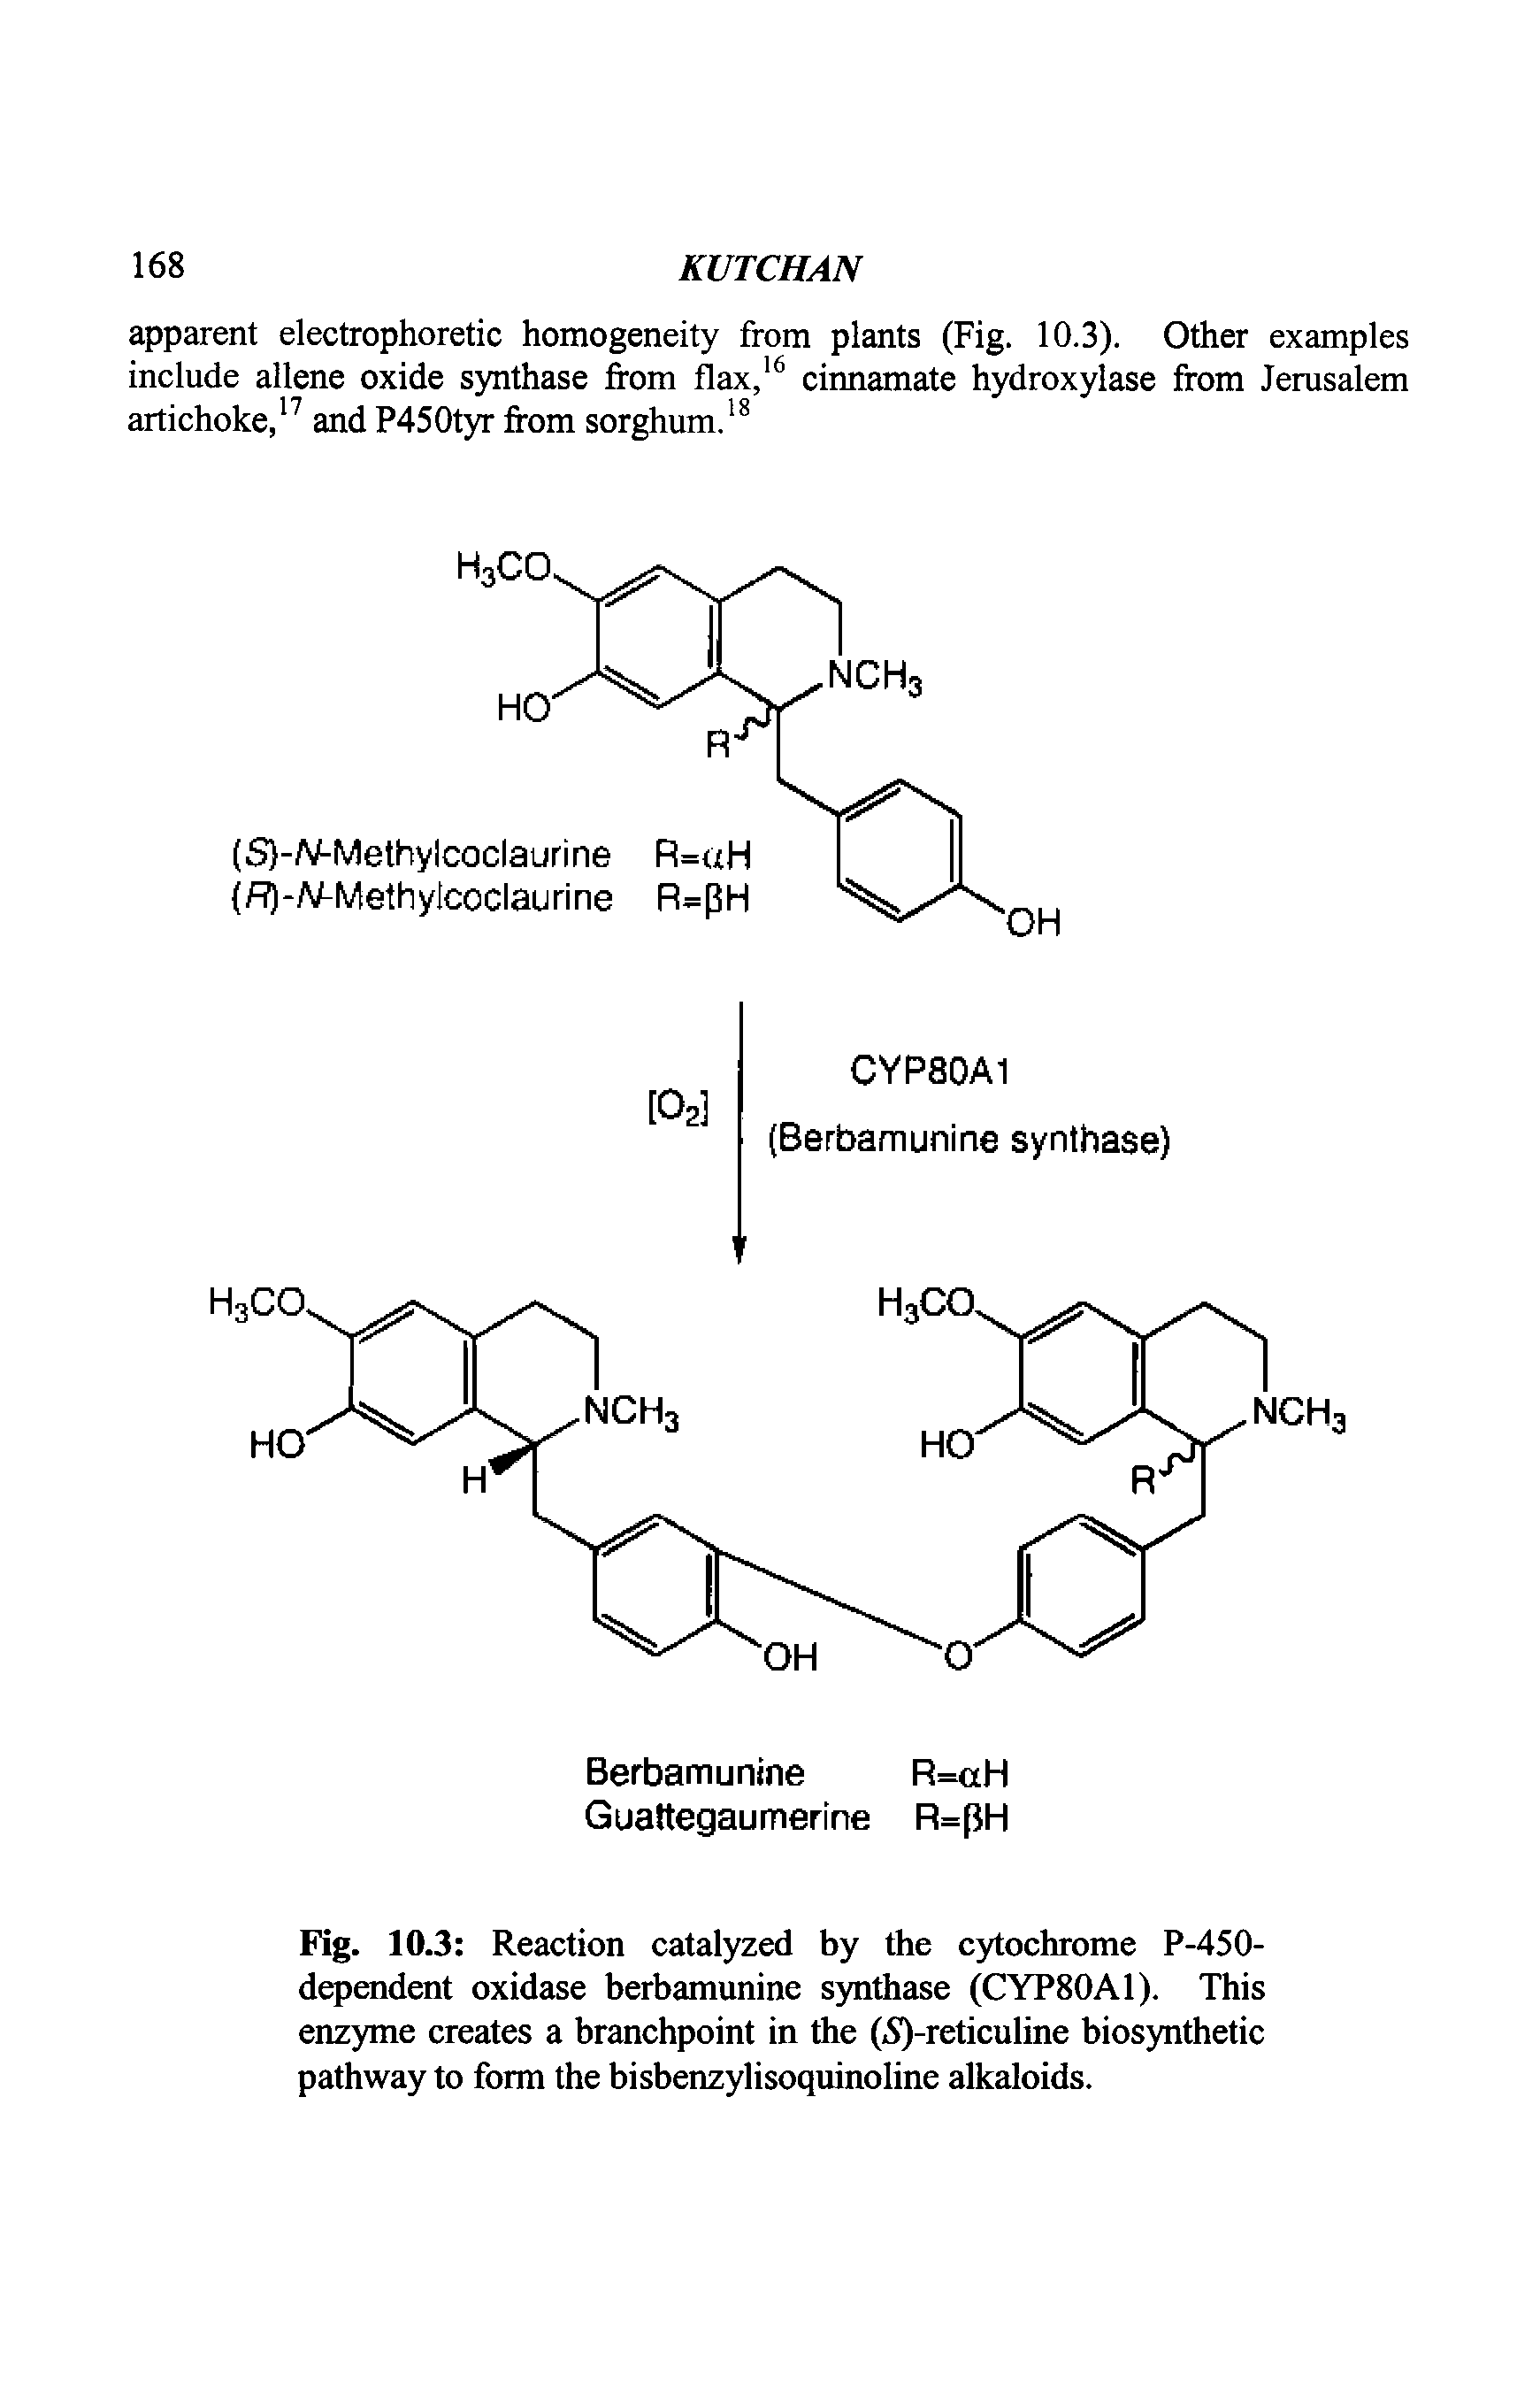 Fig. 10.3 Reaction catalyzed by the cytochrome P-450-dependent oxidase berbamunine synthase (CYP80A1). This enzyme creates a branchpoint in the (5)-reticuline biosynthetic pathway to form the bisbenzylisoquinoline alkaloids.